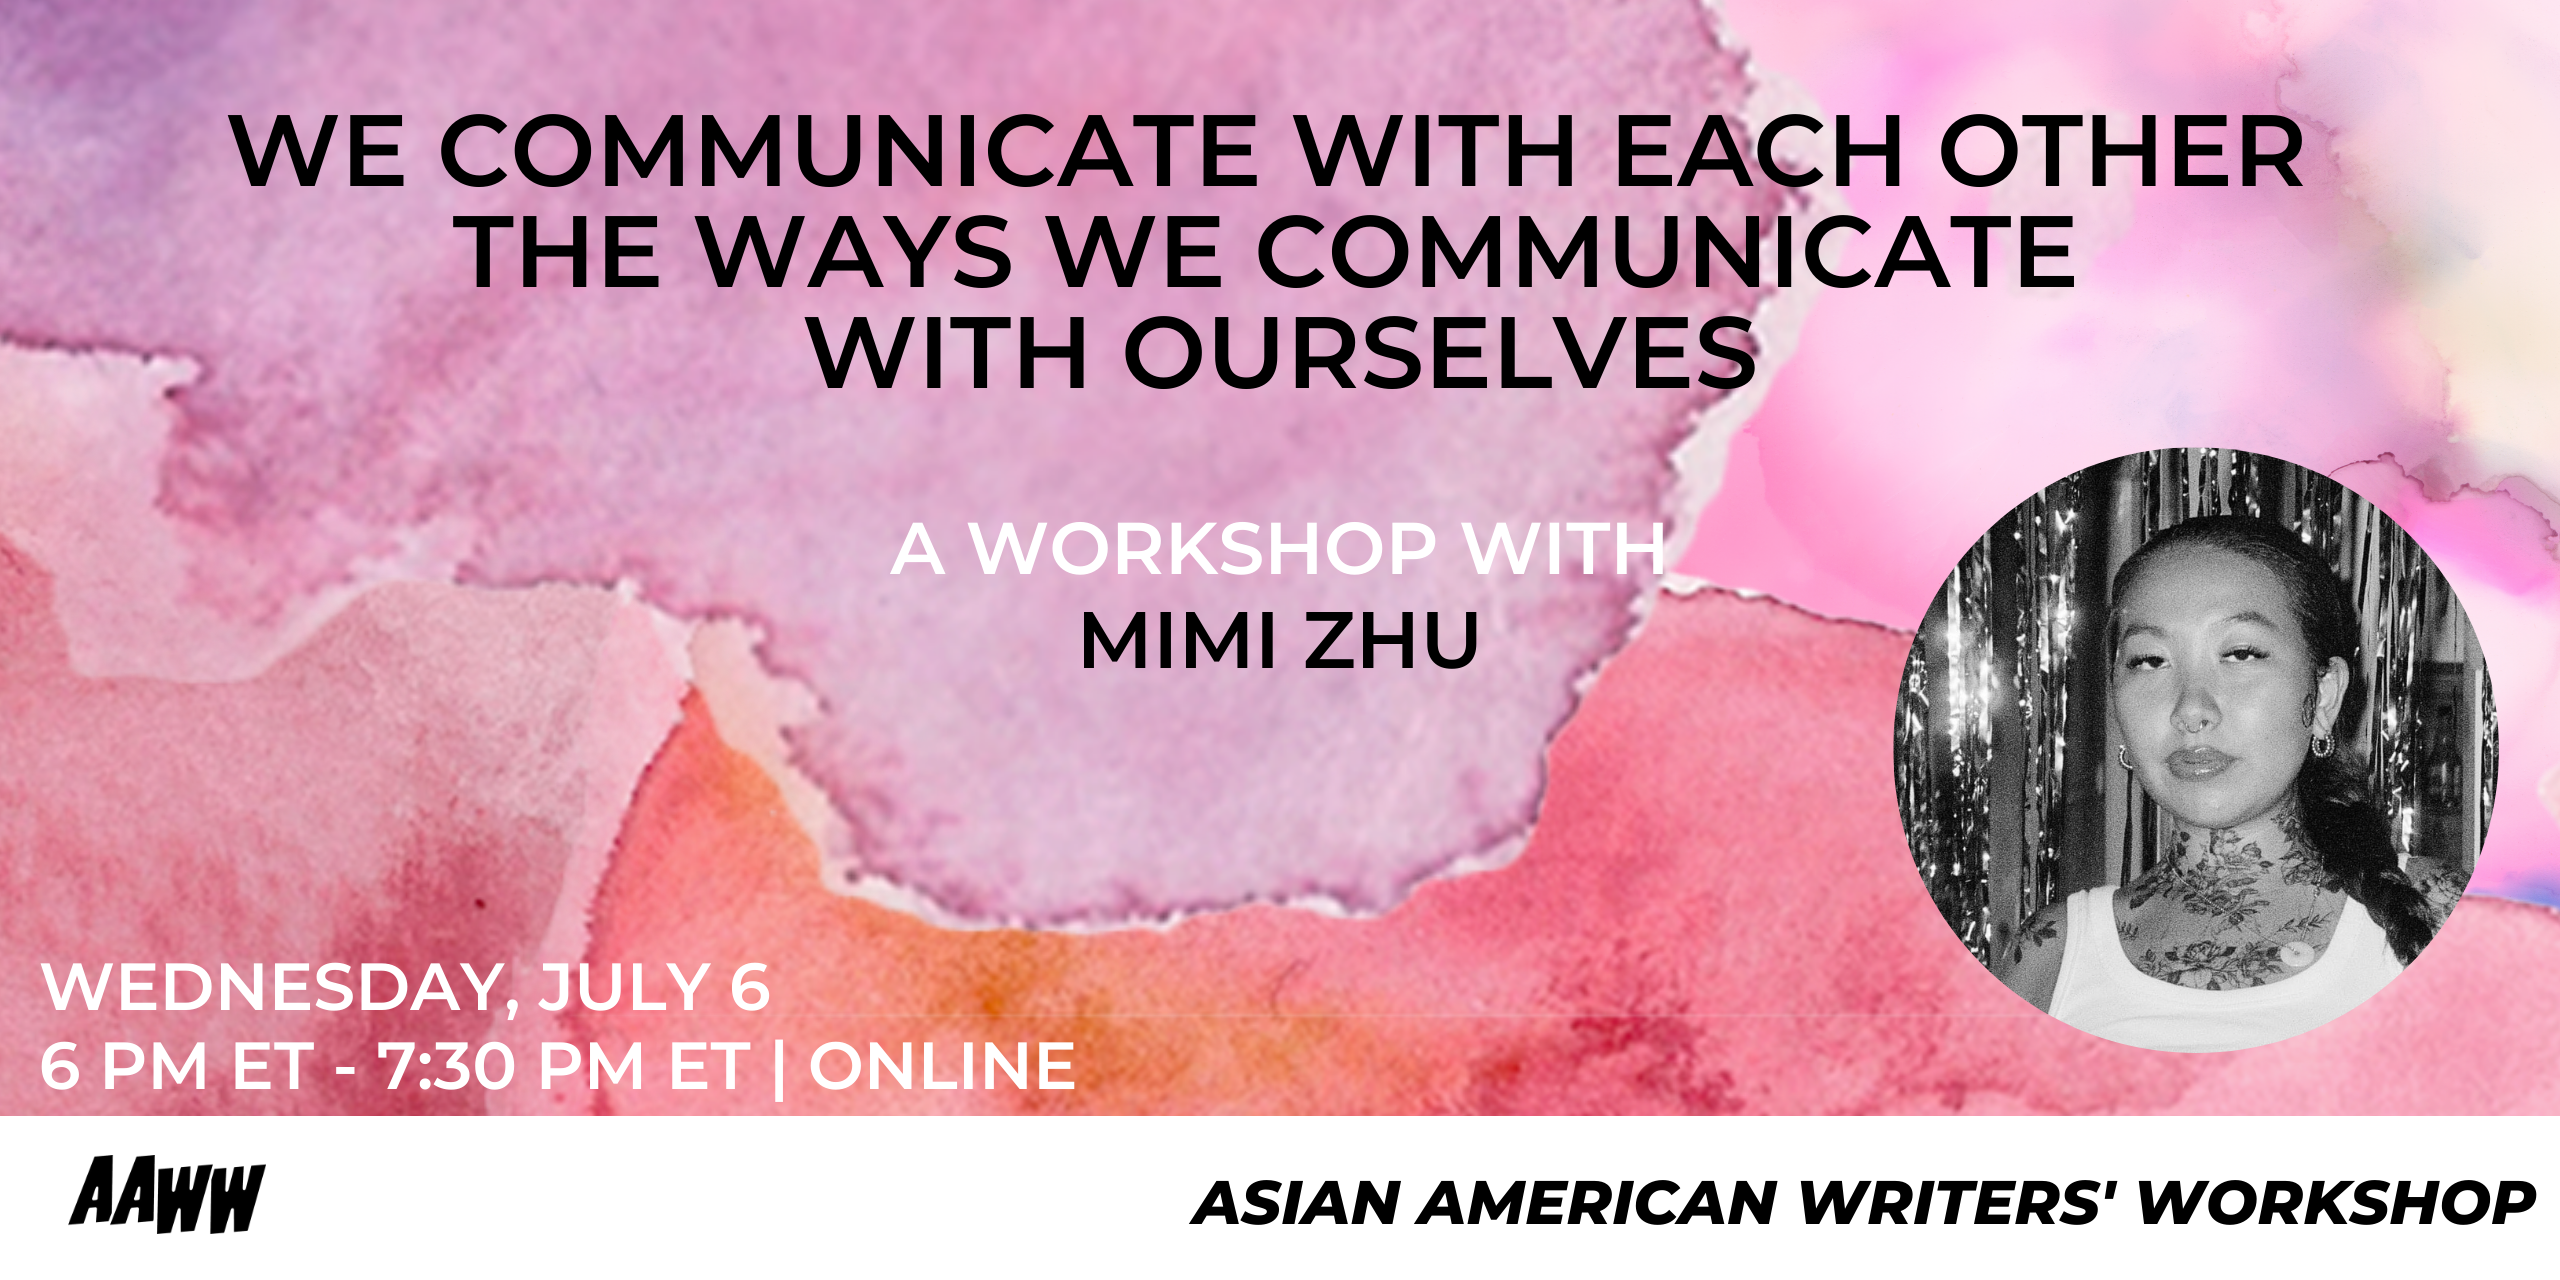 [VIRTUAL] WORKSHOP: We Communicate With Each Other the Way We Communicate with Ourselves